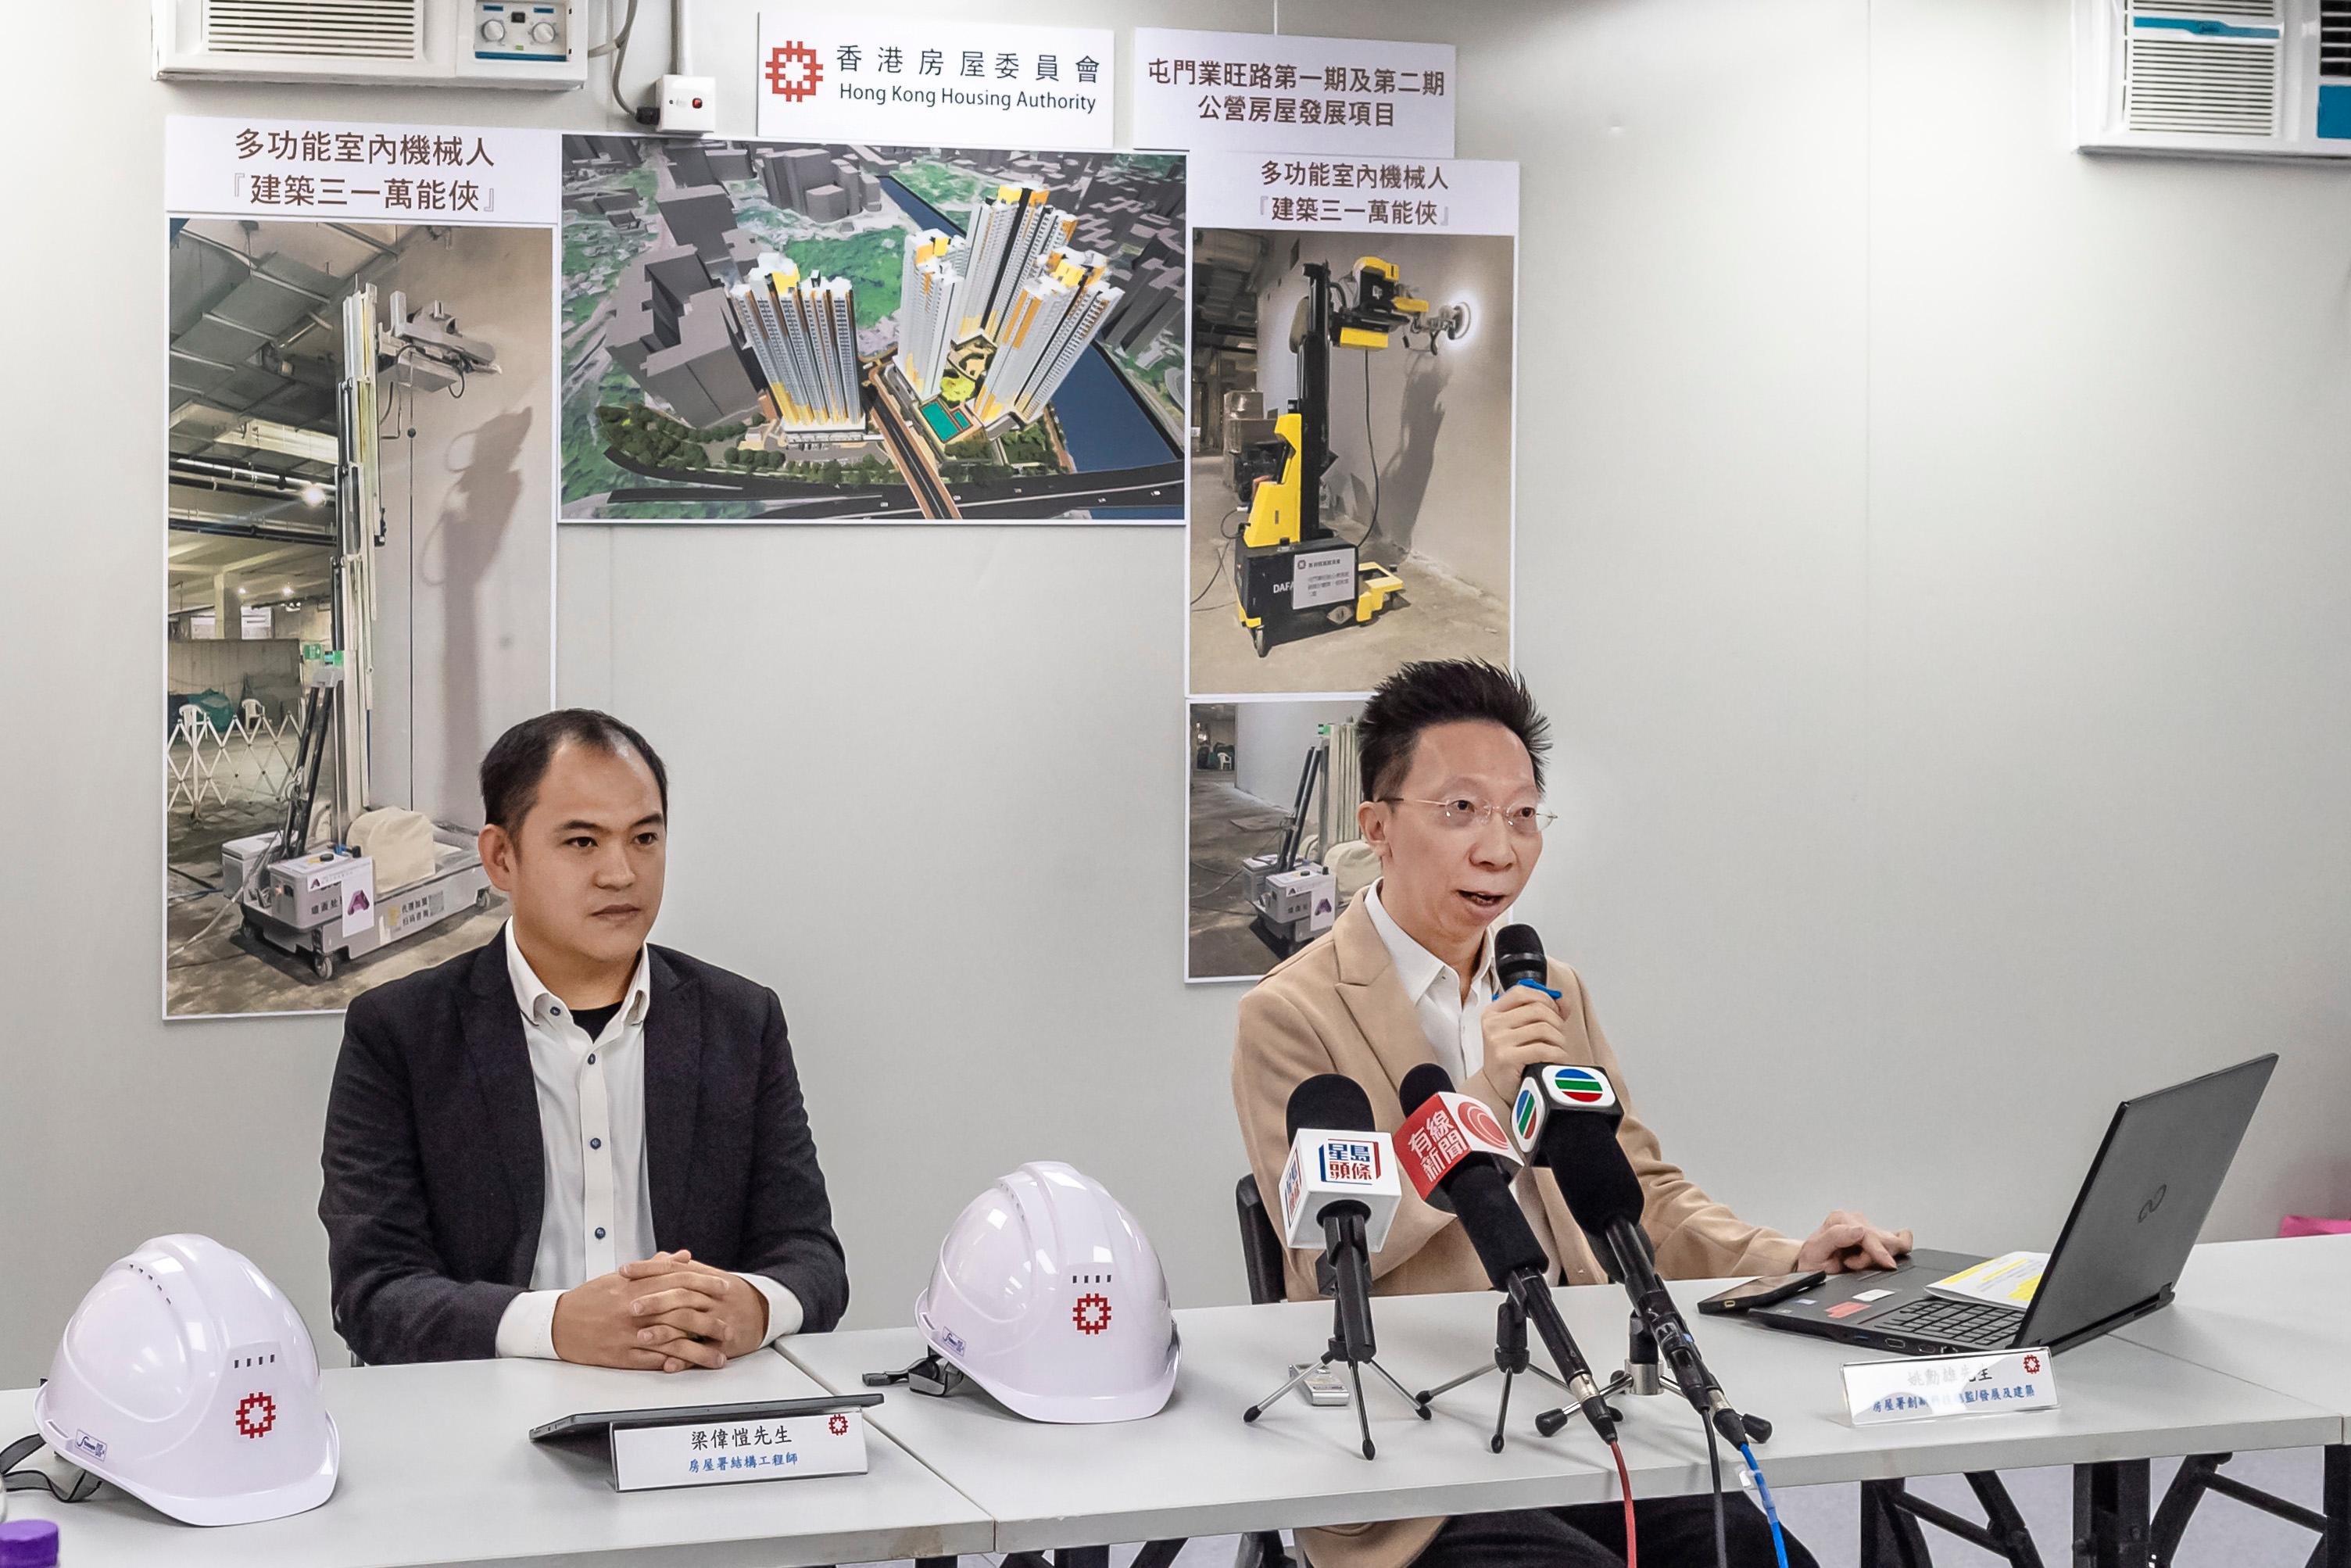 The Hong Kong Housing Authority introduced multifunctional indoor construction robot, the first of its kind, to boost safety at public housing sites. Photo shows the Head/Development and Construction InnoTech, Mr Romeo Yiu (right), and Structural Engineer Mr Arthur Leung (left) of the Housing Department at the media briefing.